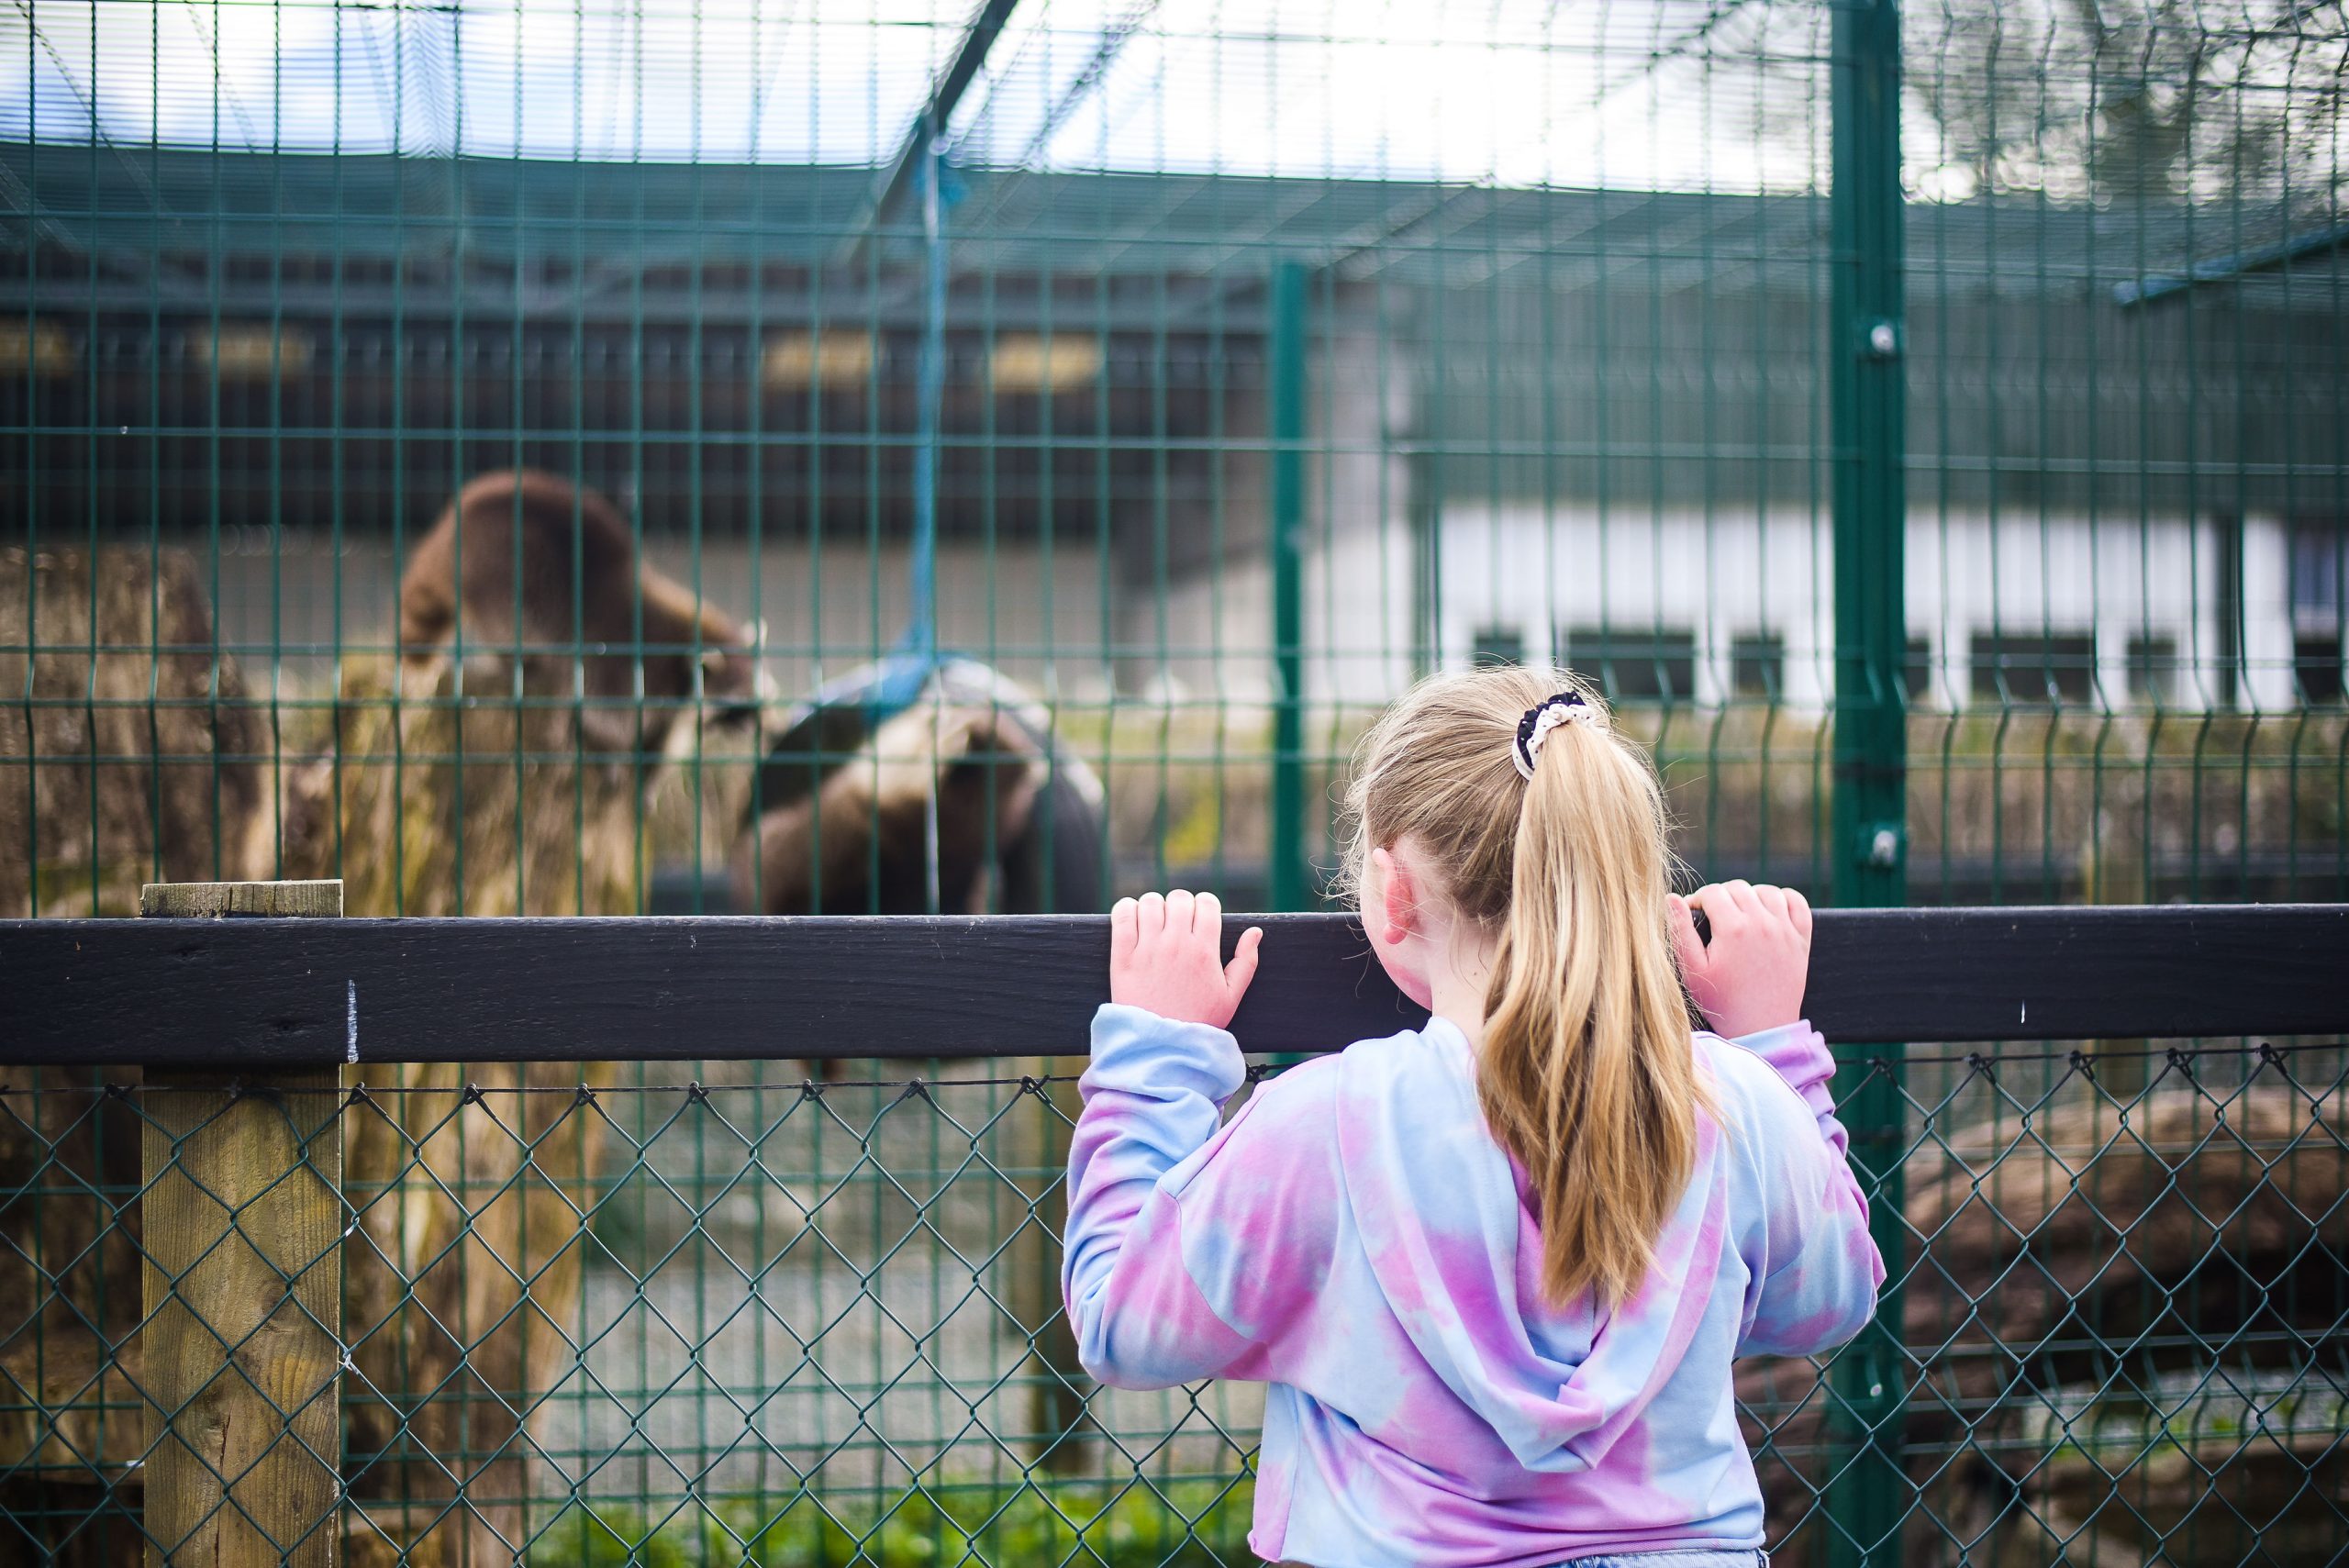 Little girl standing at the fence looking at the animals